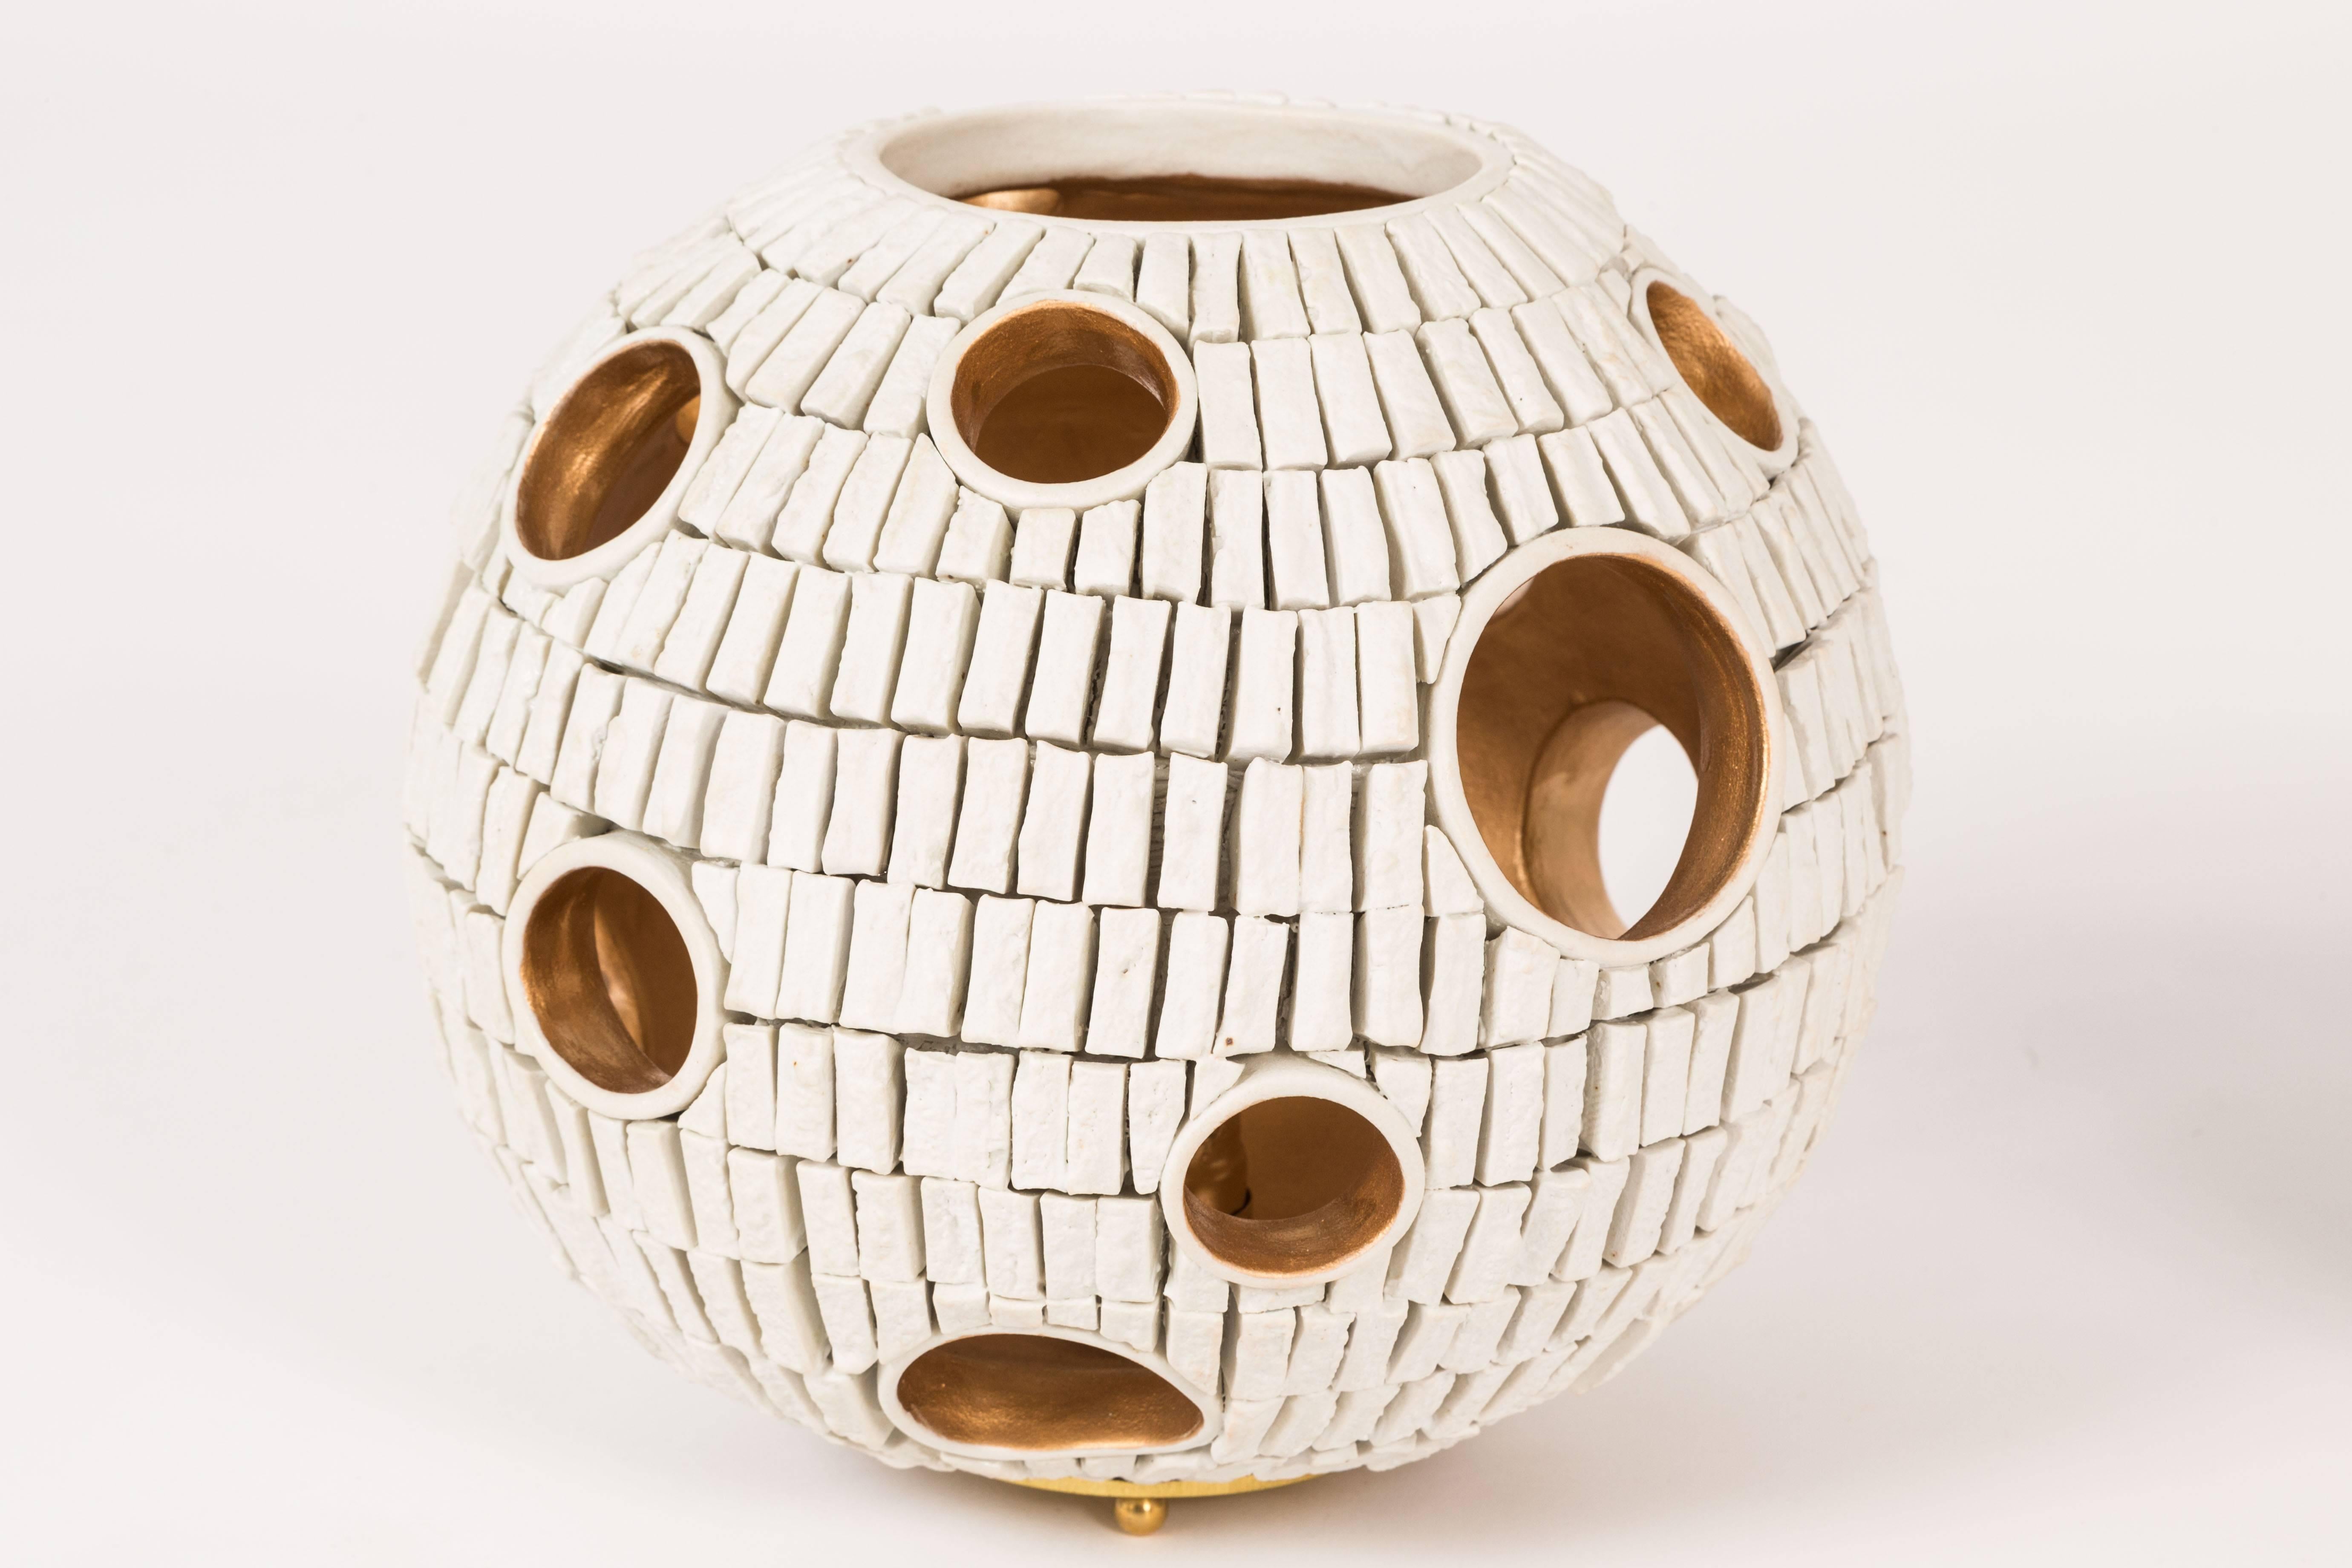 This is our latest collaboration with LA Ceramicist Titia Esties. Completely hand built this orb has an otherworldly feel to it. Assembled from hundreds of hand-cut tiles the varying sized cut-out allow for the glow of the gold painted interiors to